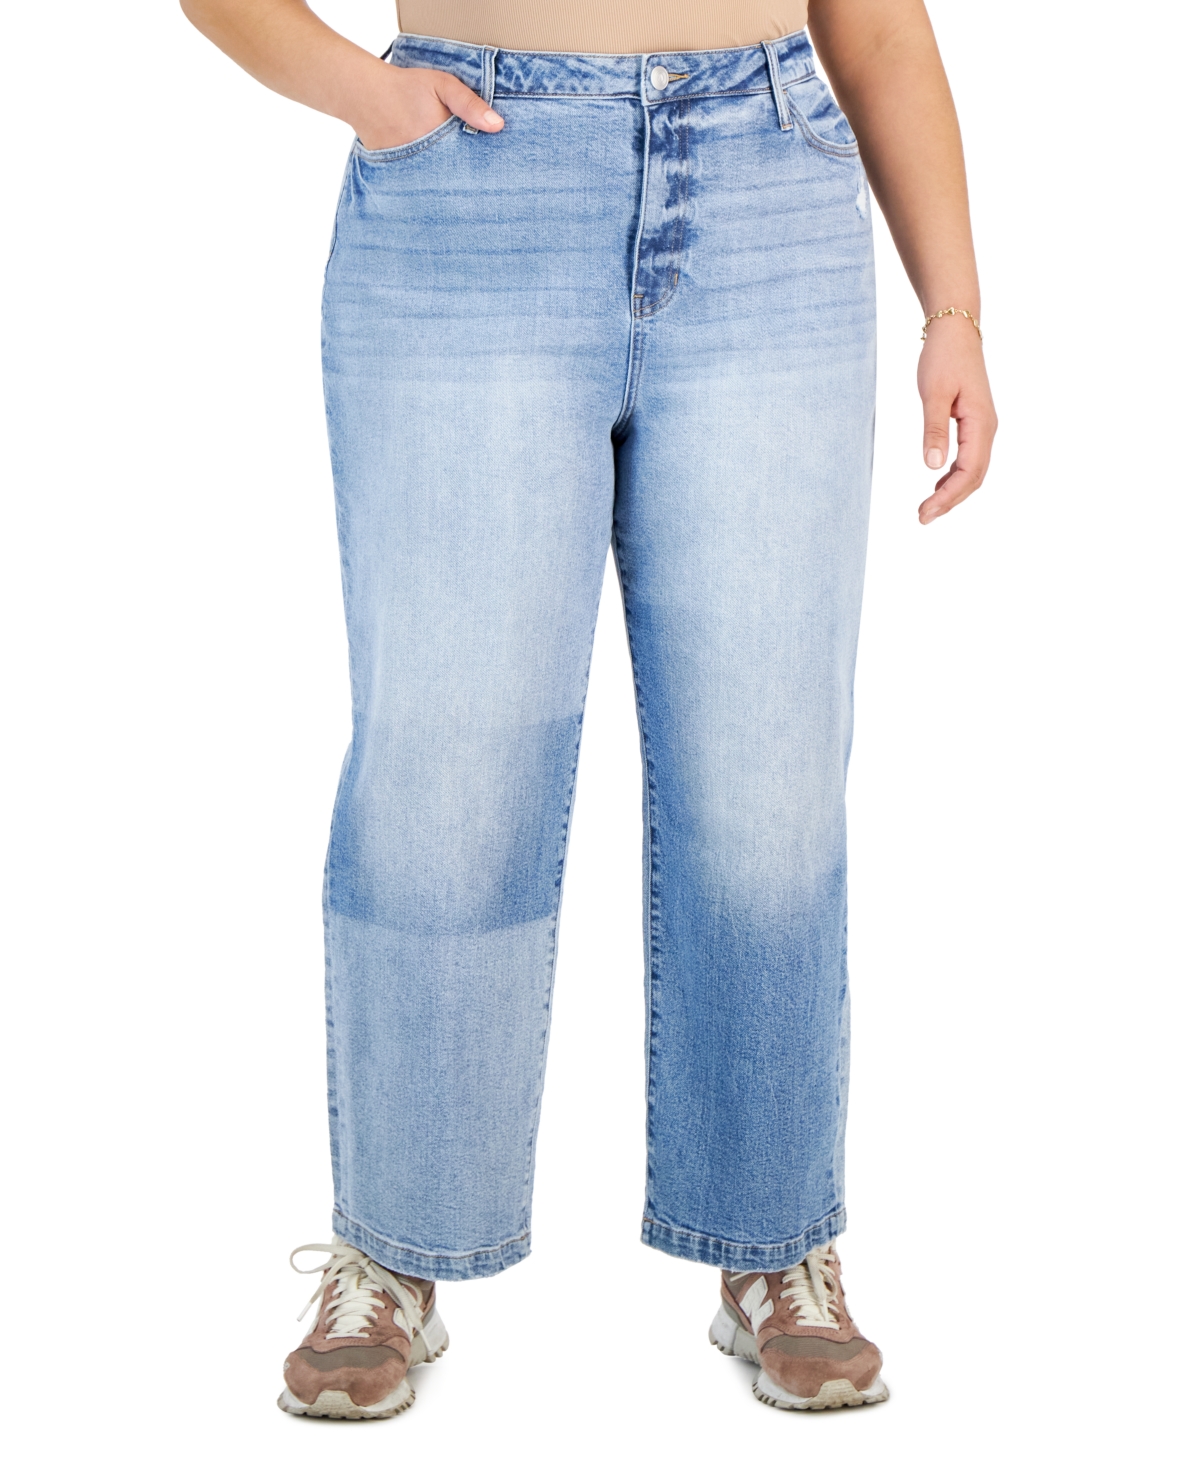 Plus Size Ultra-High-Rise Two-Tone Jeans - Blue Wash